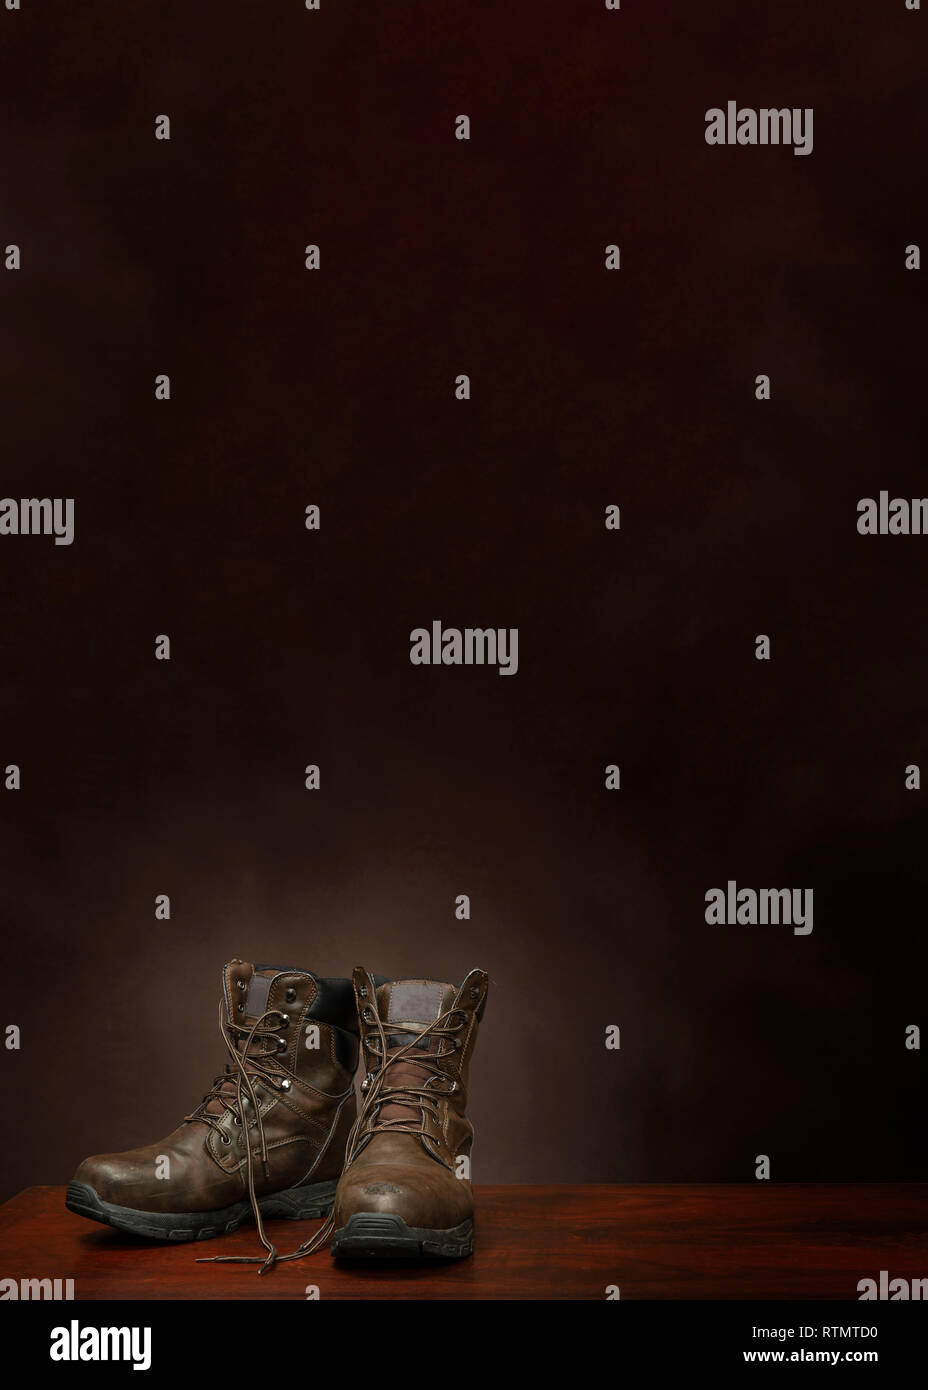 Vertical shot of a pair of old work boots on a brown background with copy space.  The boots are in the lower left hand corner. Stock Photo